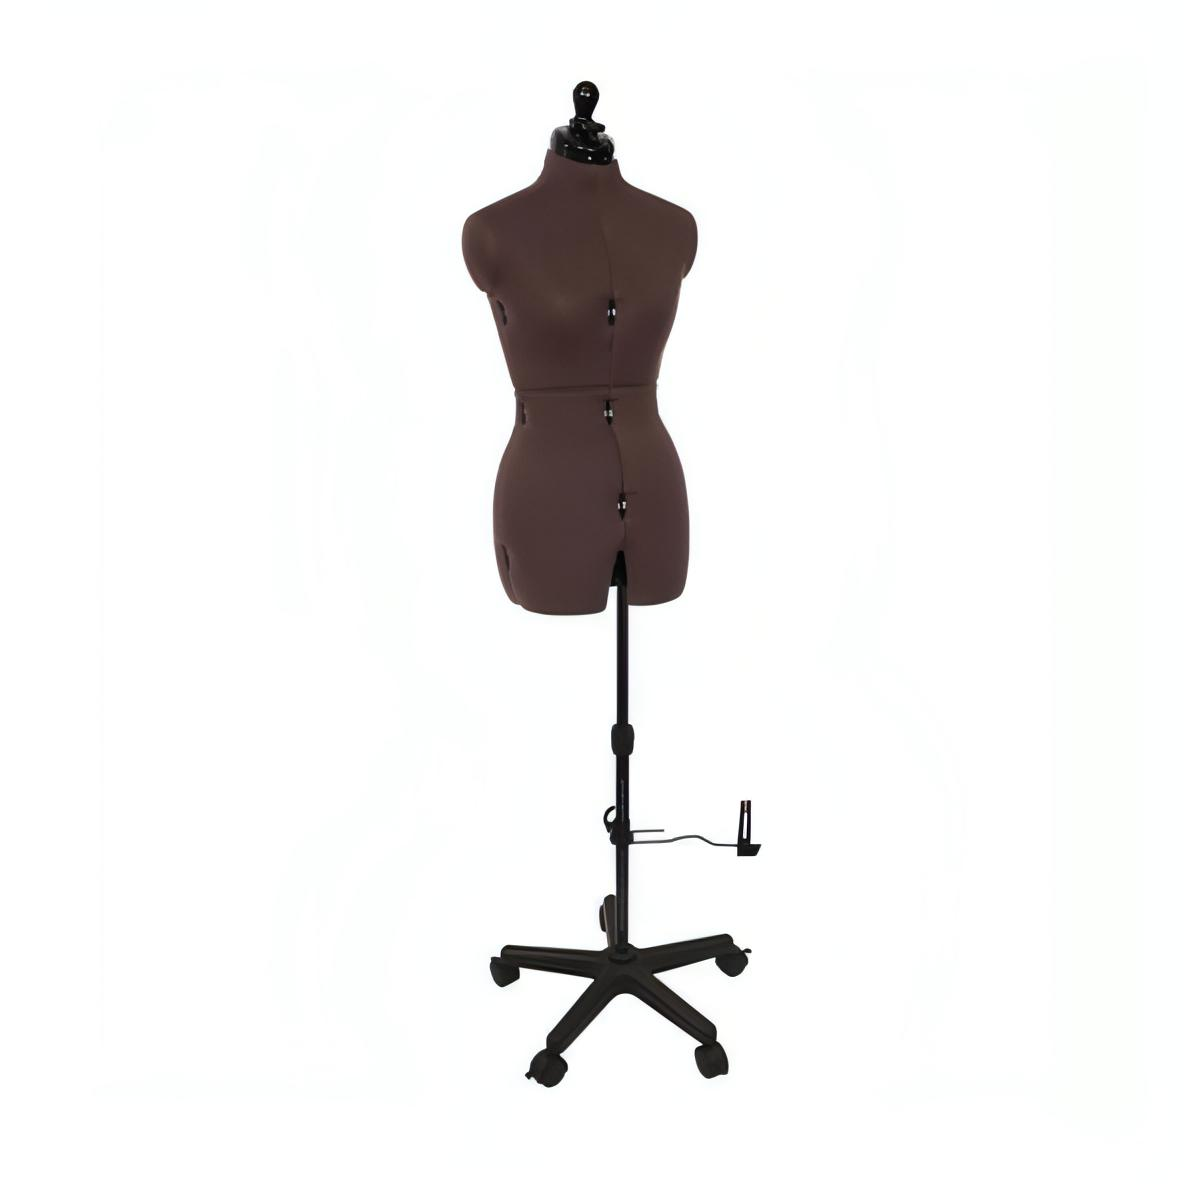 Adjustoform * made in the UK * Olivia Dress Form (Brown) available in 4 sizes with 12 adjusters